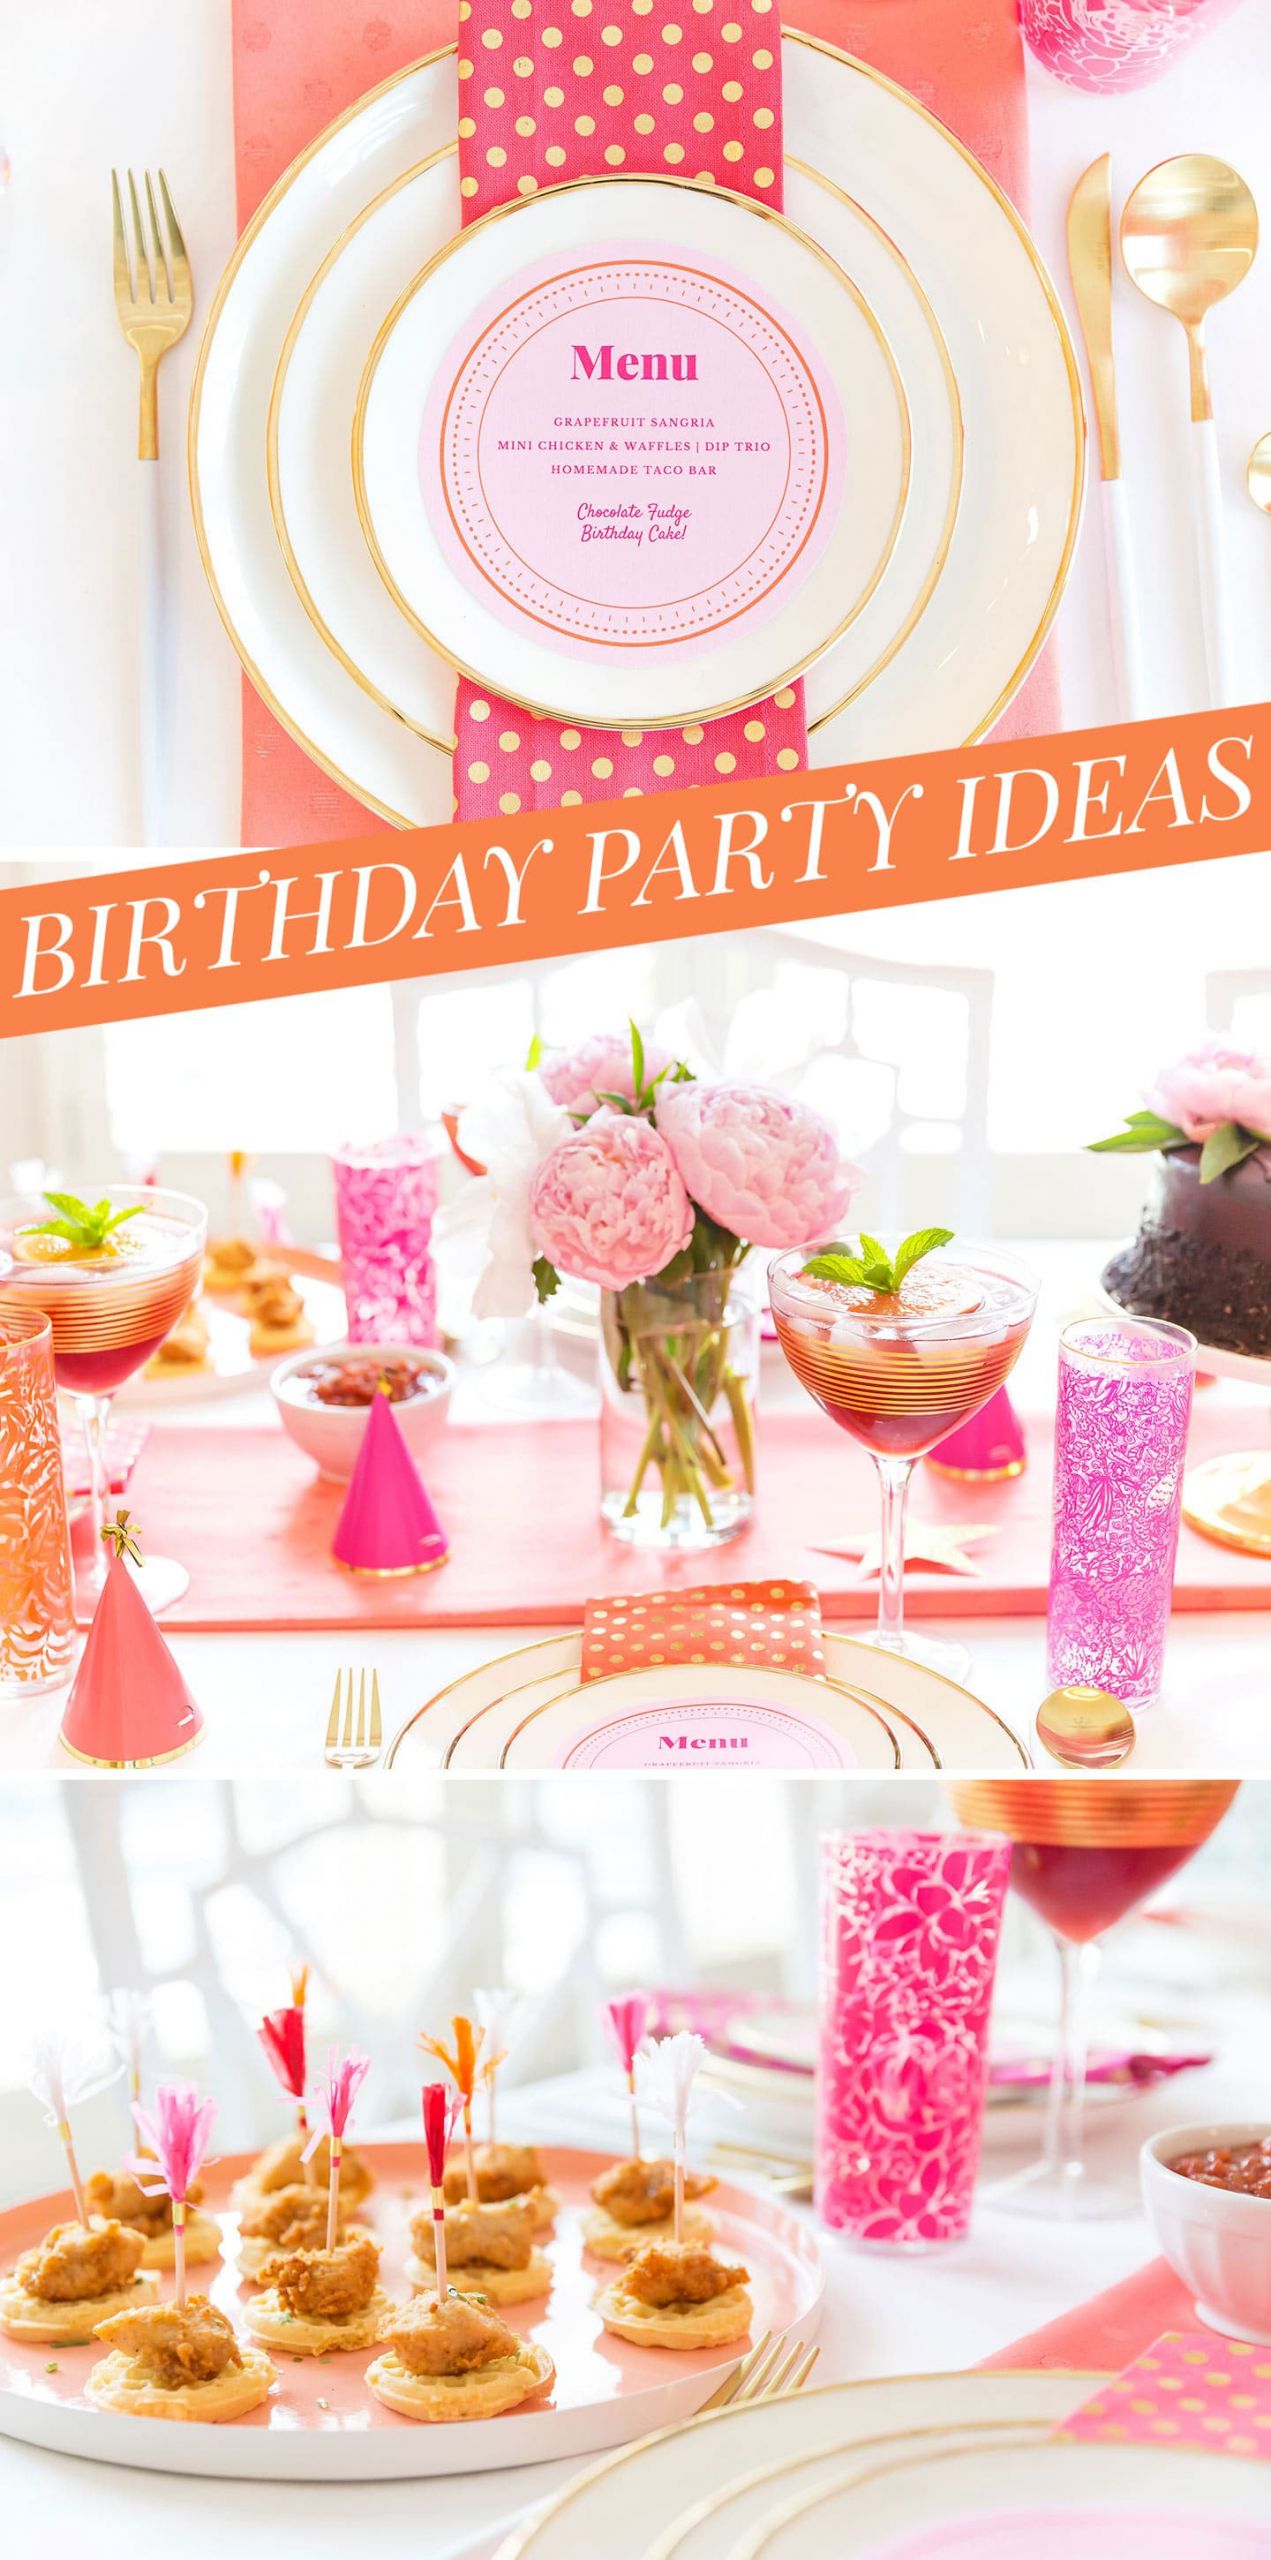 Creative Birthday Party Ideas For Adults
 Creative Adult Birthday Party Ideas for the Girls